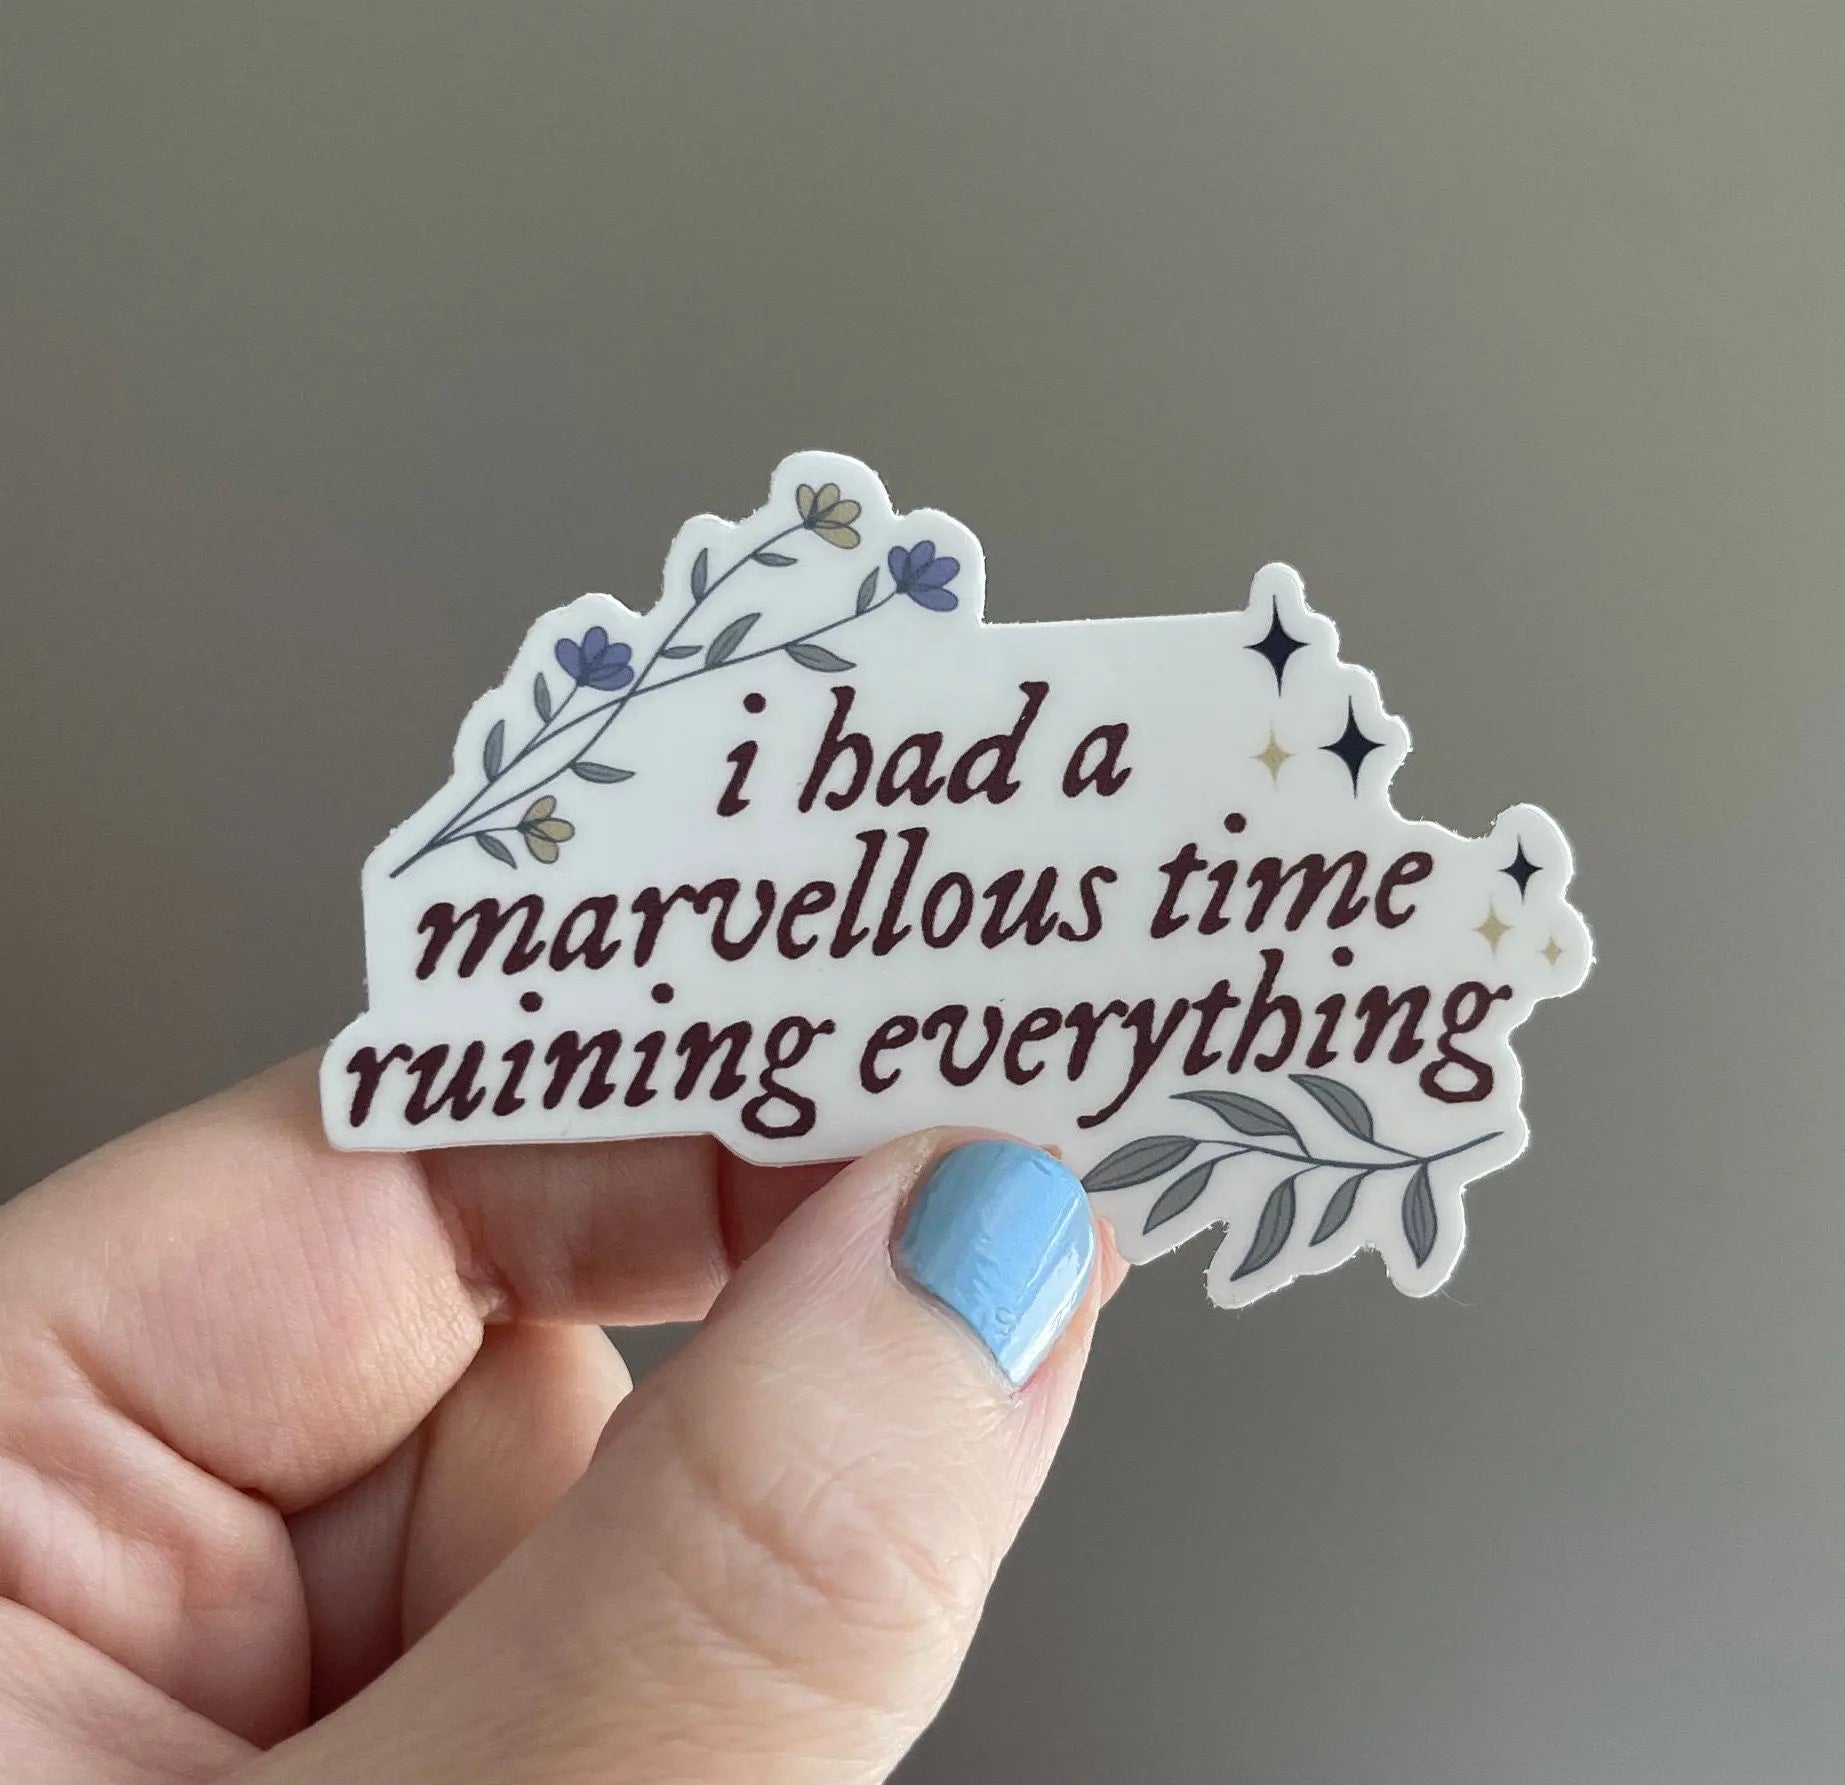 I had a marvellous time ruining everything sticker MangoIllustrated